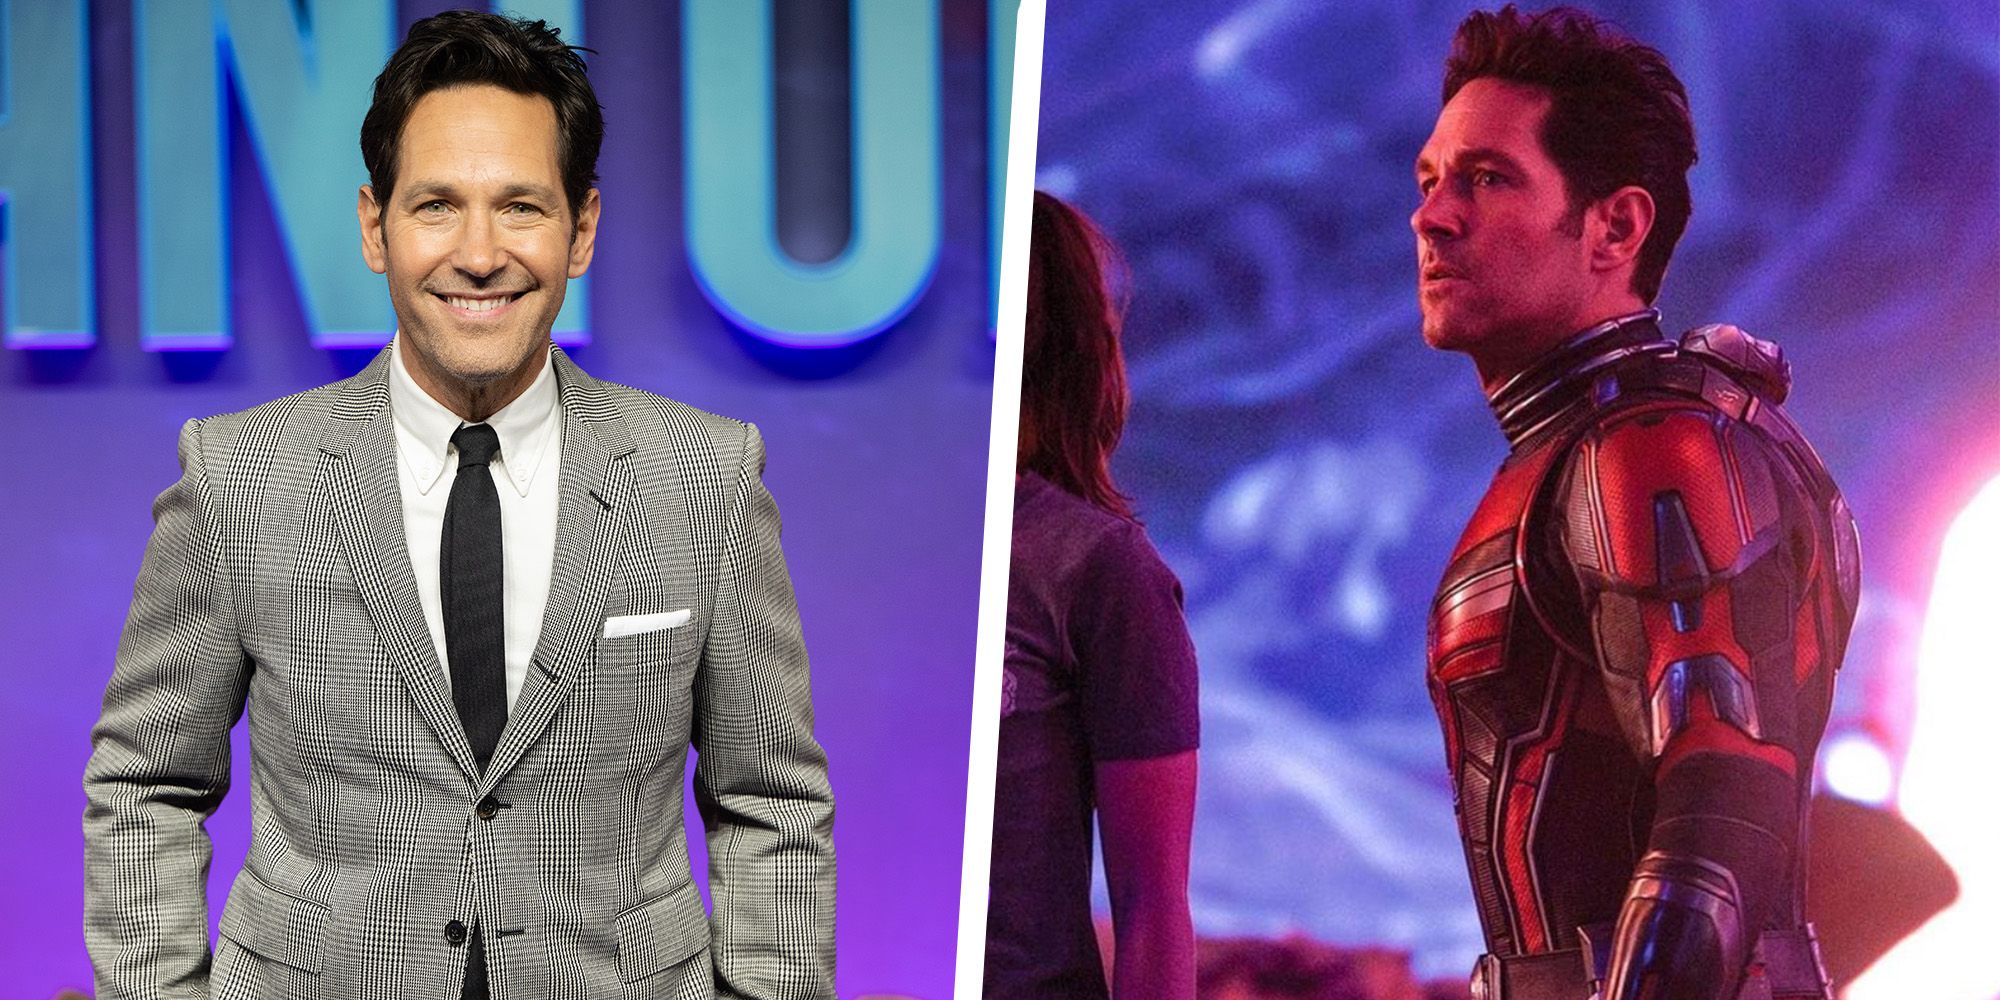 Paul Rudd on His “Very Restrictive” Diet When Preparing to Play